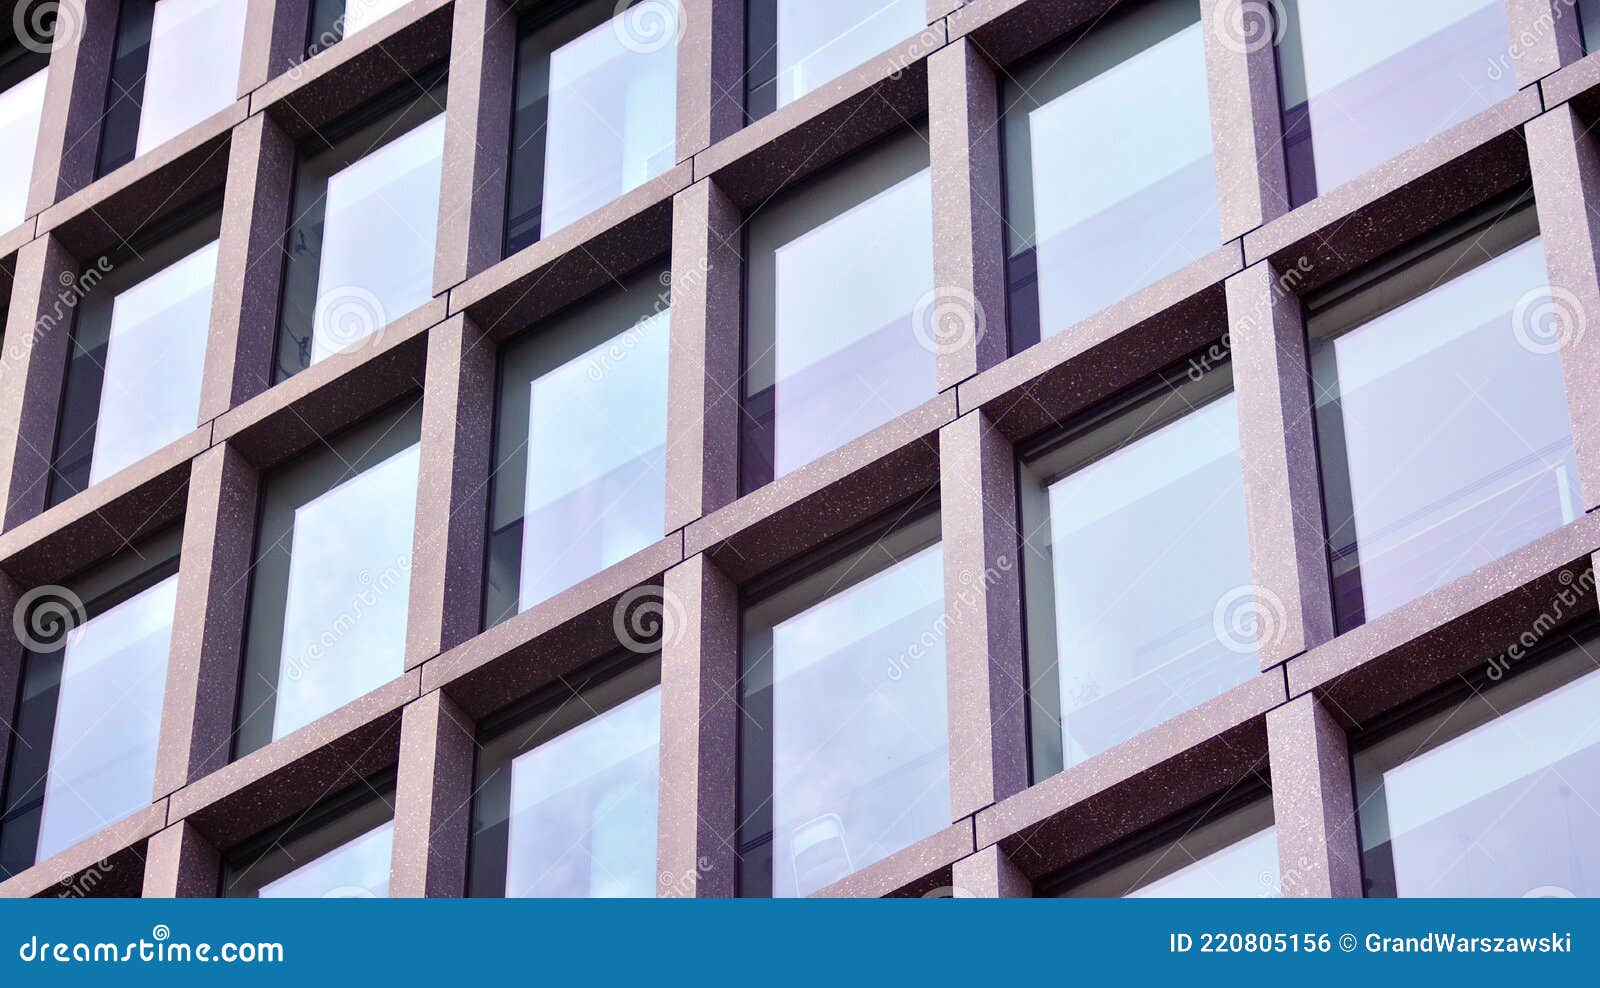 Abstract Fragment of Contemporary Architecture, Walls Made of Glass and ...